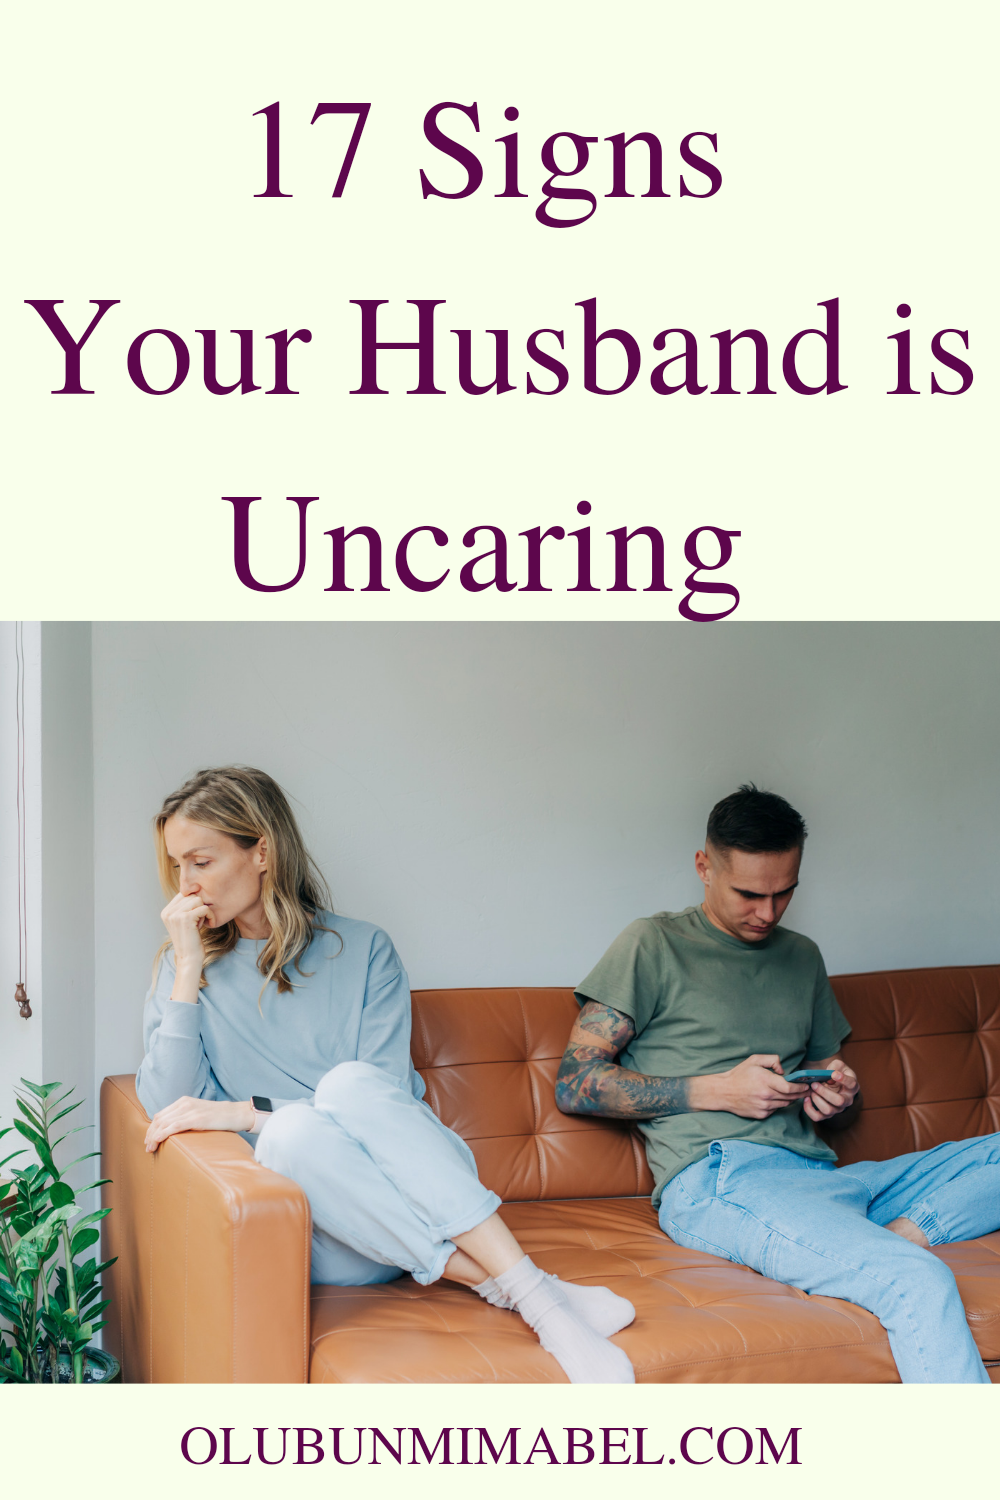 Signs of An Uncaring Husband